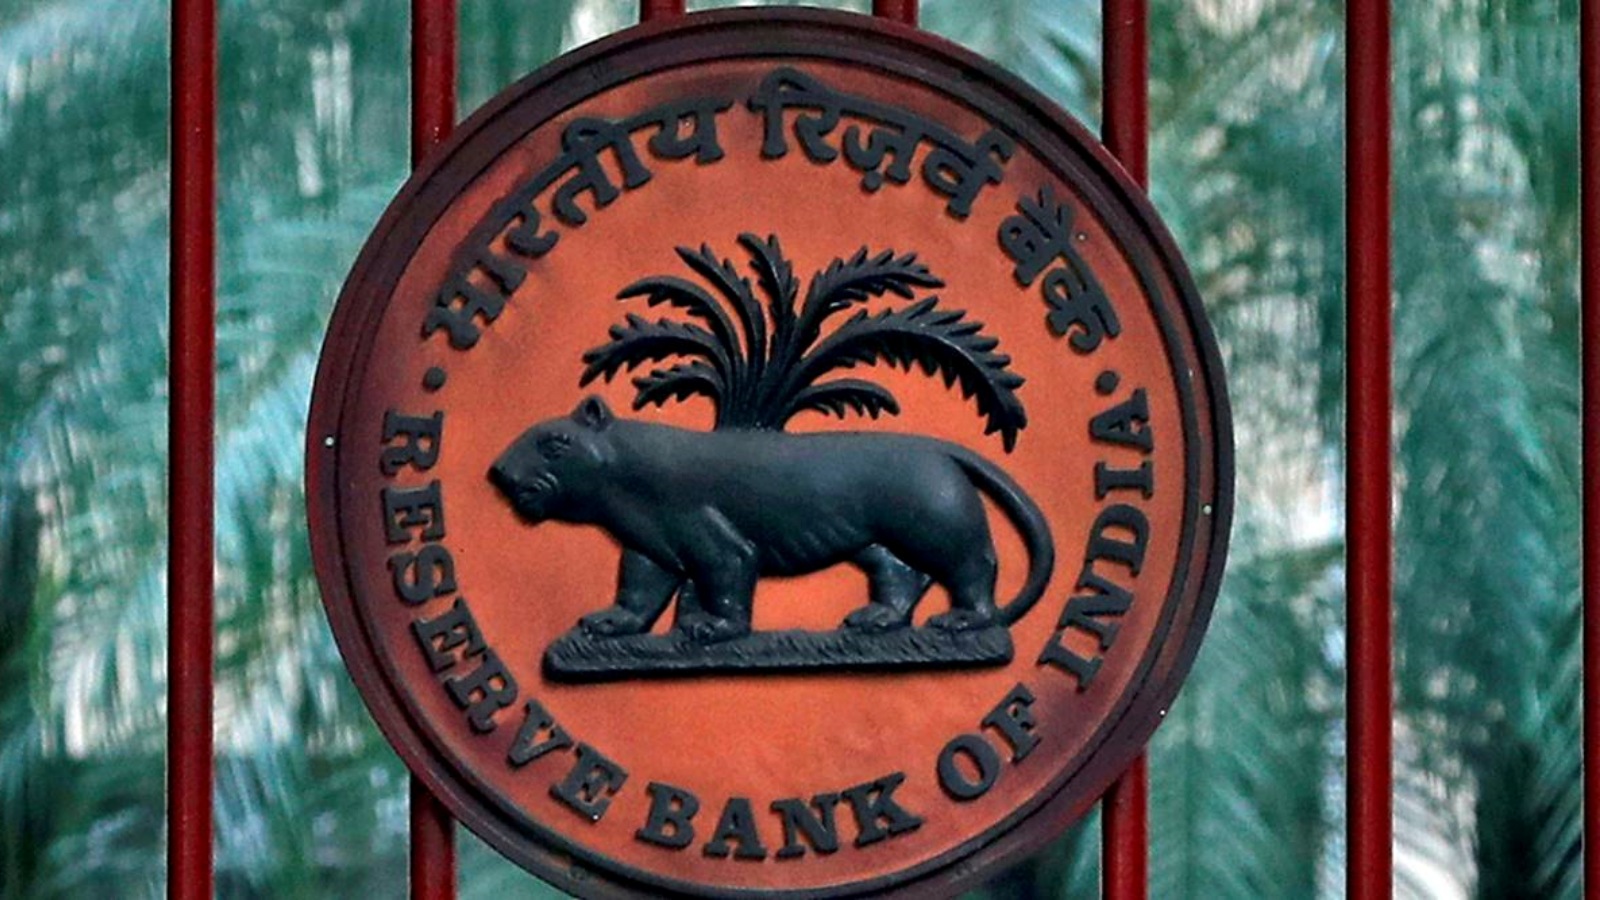 RBI proposes to bar recovery agents from calling borrowers before 8 am, after 7 pm Business